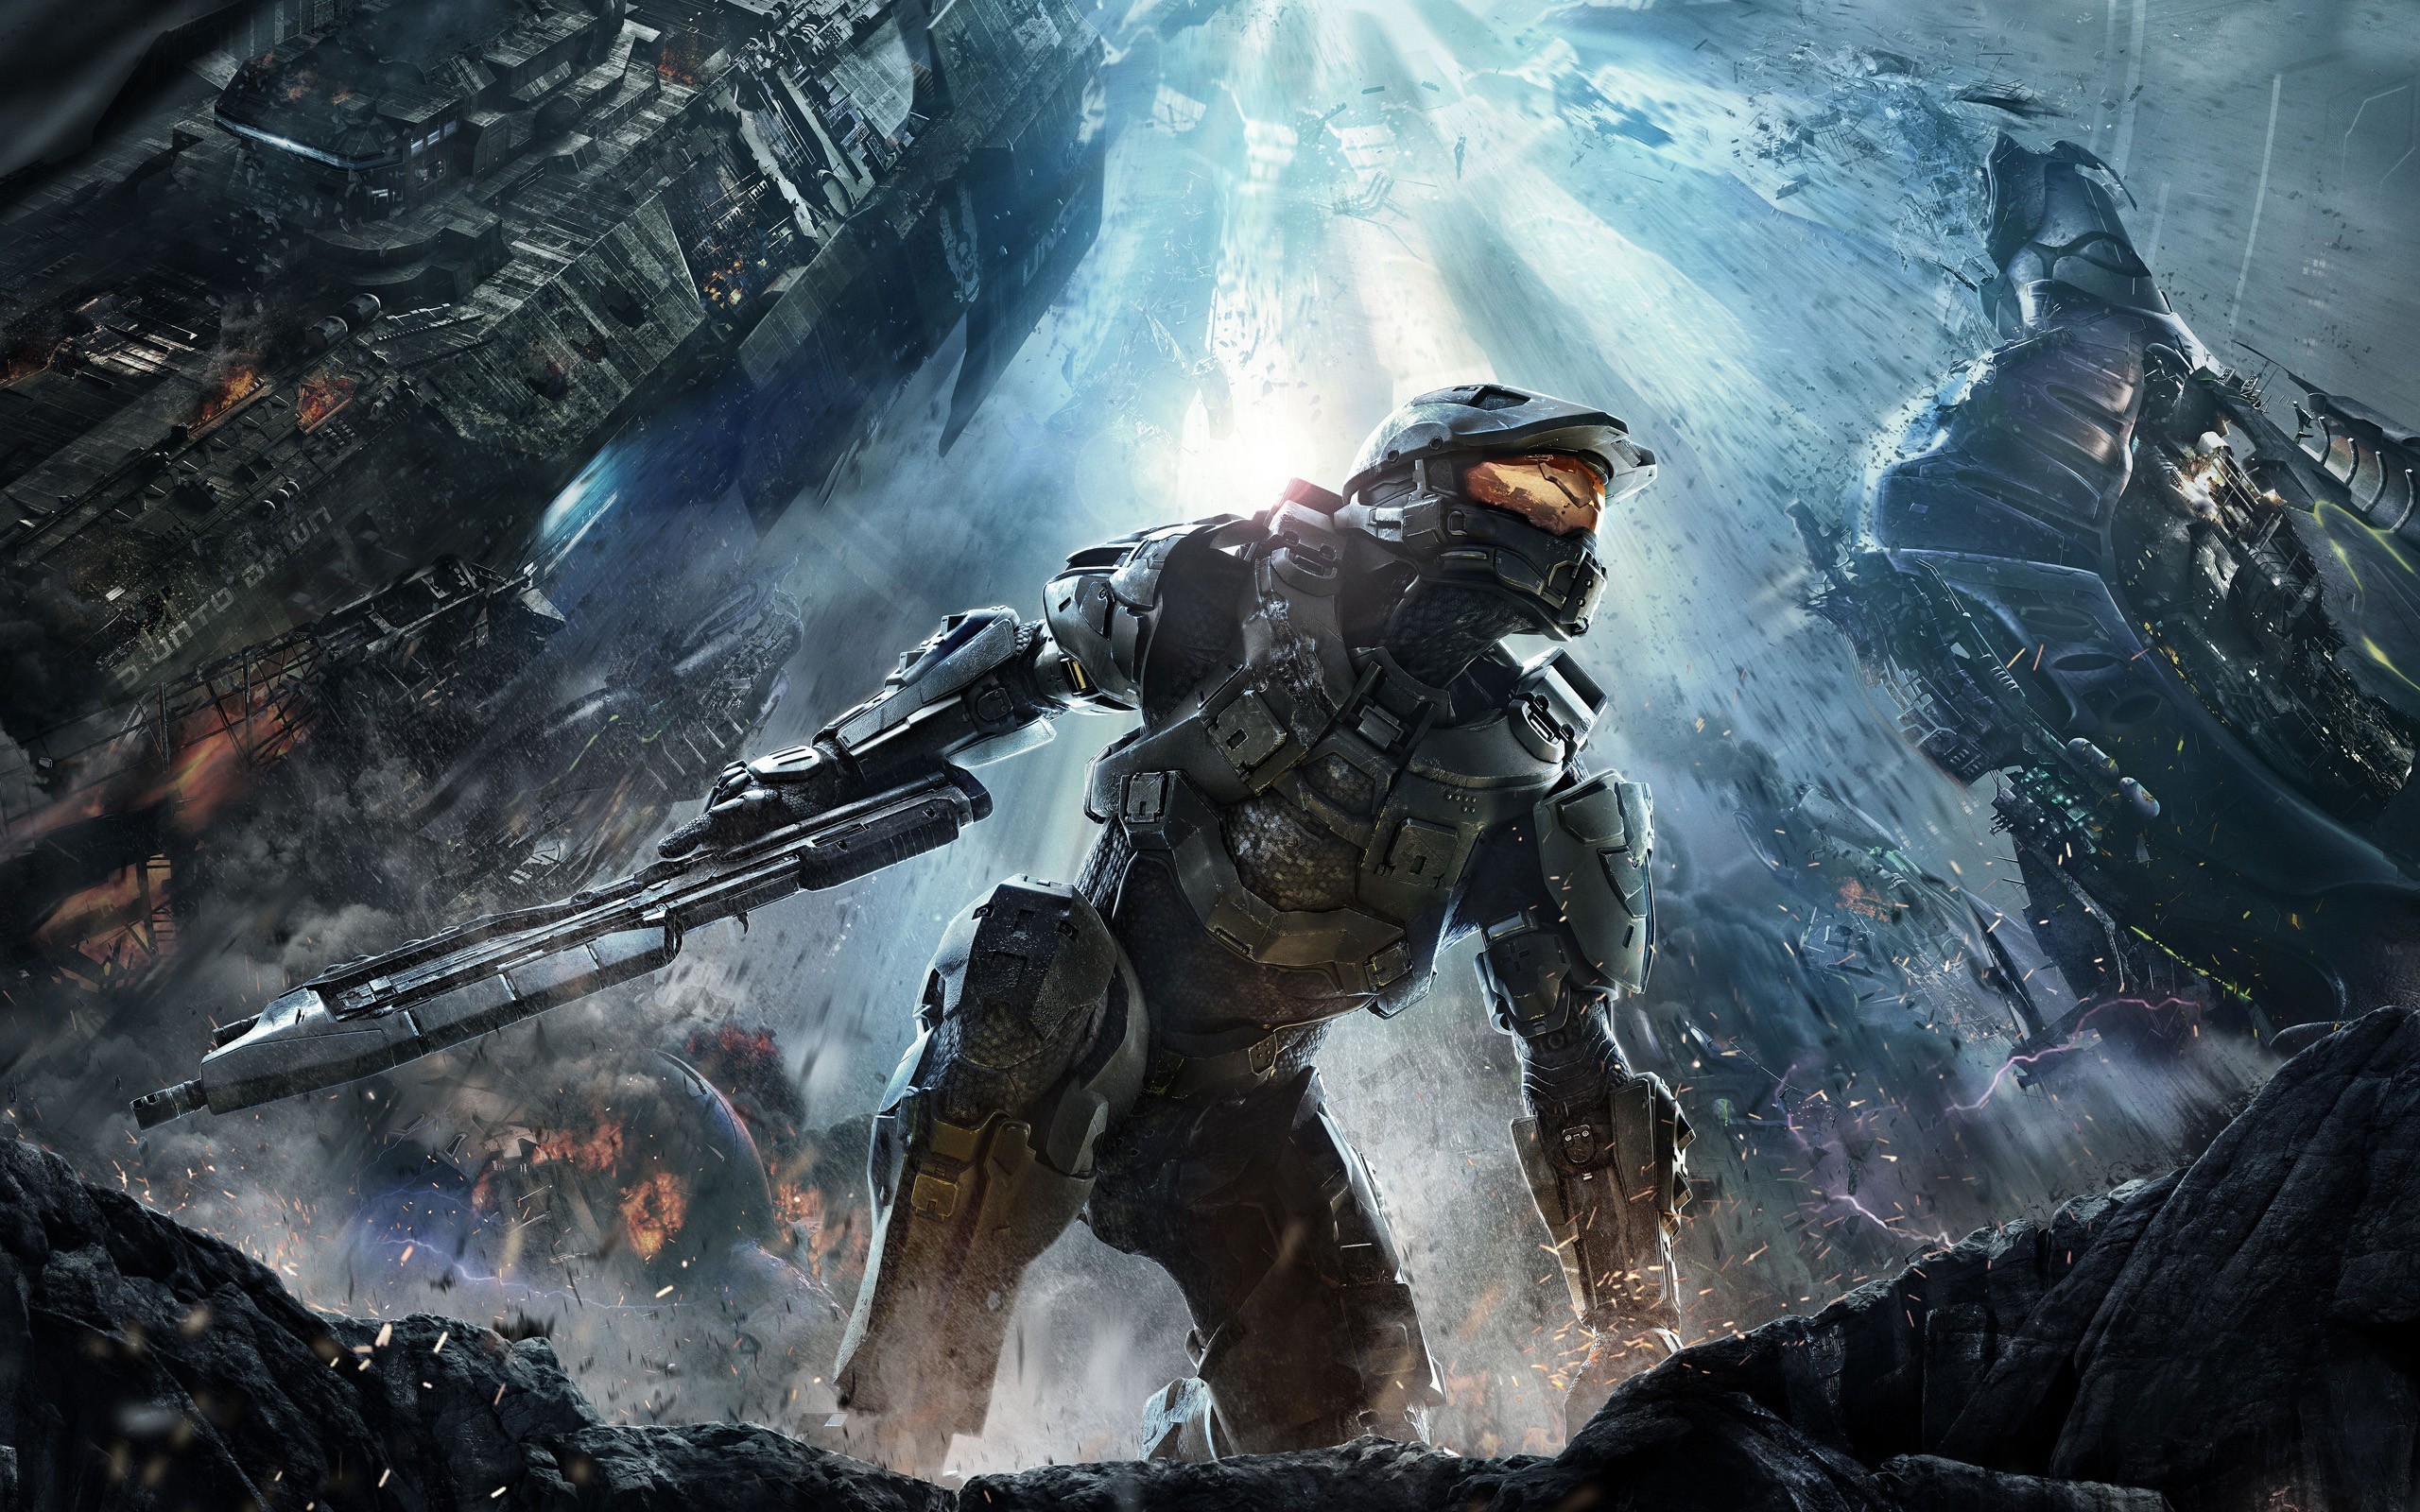 2560x1600 Search Results for “awesome halo hd wallpapers” – Adorable Wallpapers